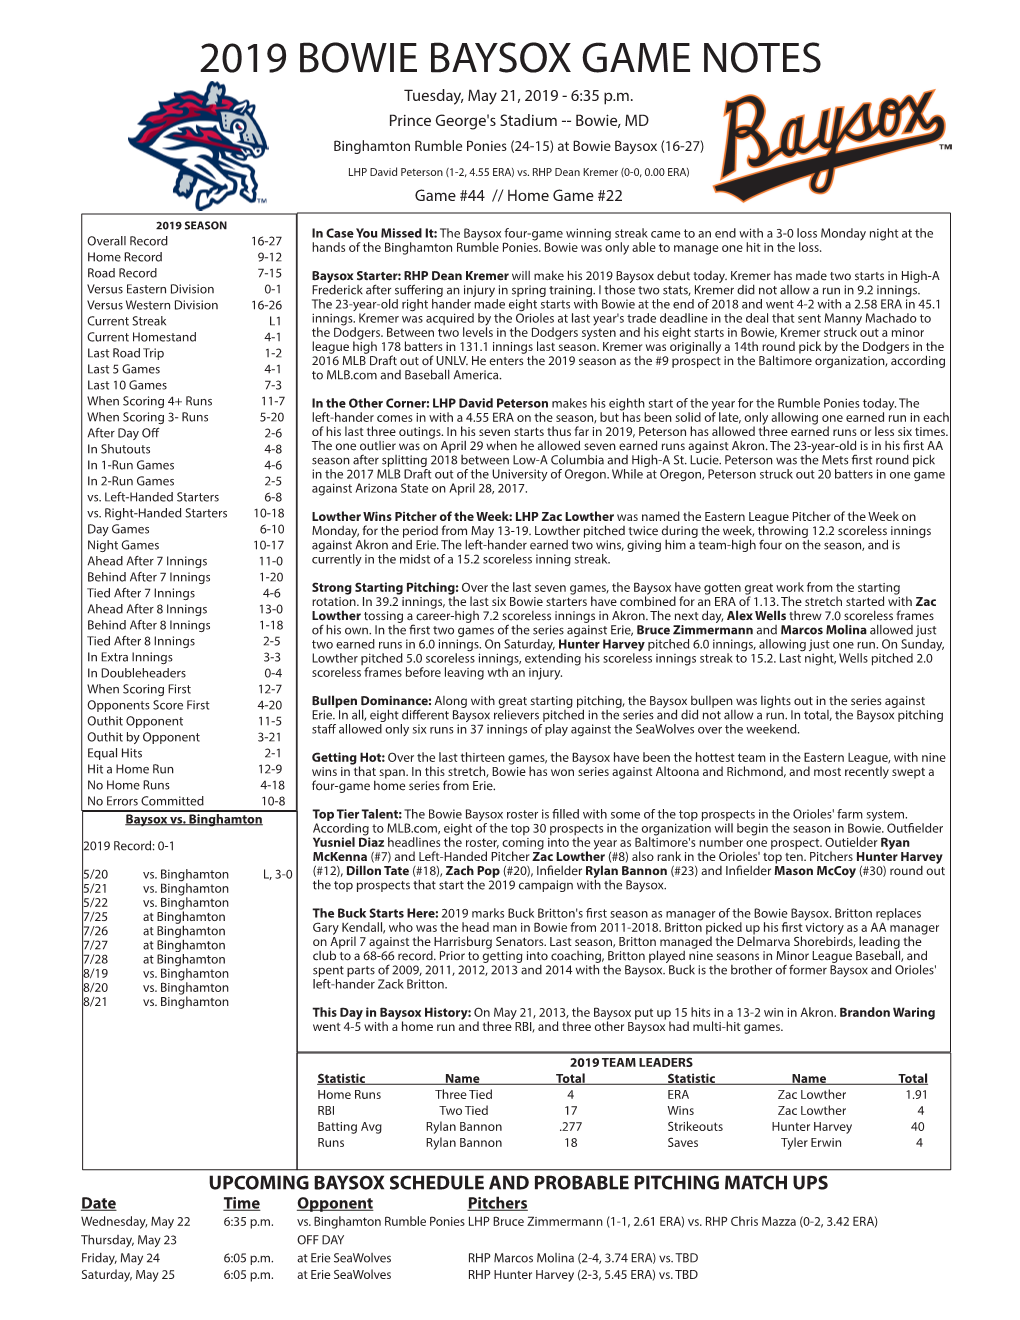 2019 BOWIE BAYSOX GAME NOTES Tuesday, May 21, 2019 - 6:35 P.M